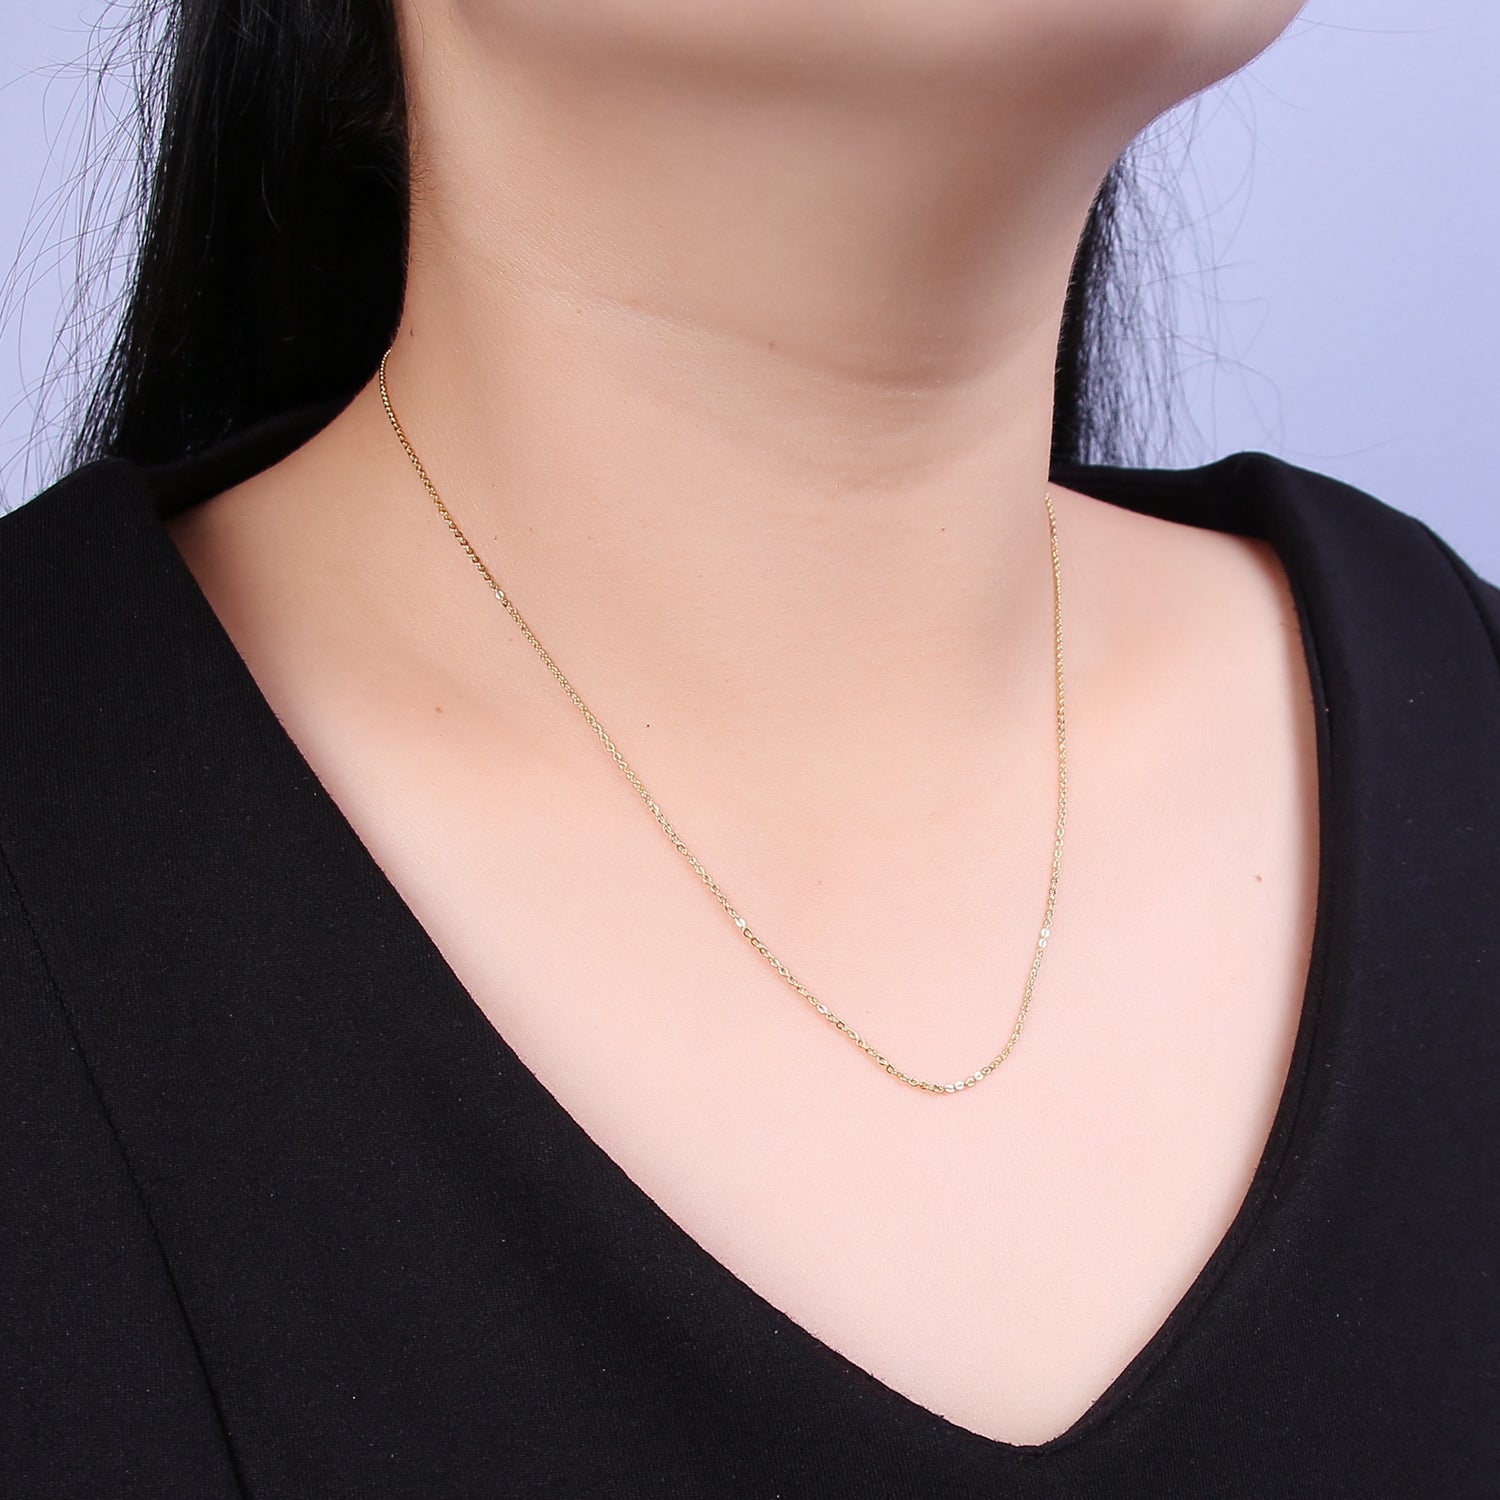 19" Adjustable Necklace ready to wear 24k Gold Filled Flat Cable Chain Necklace Dainty Chain For Jewelry Making with Pendant Charm WA-737 - DLUXCA